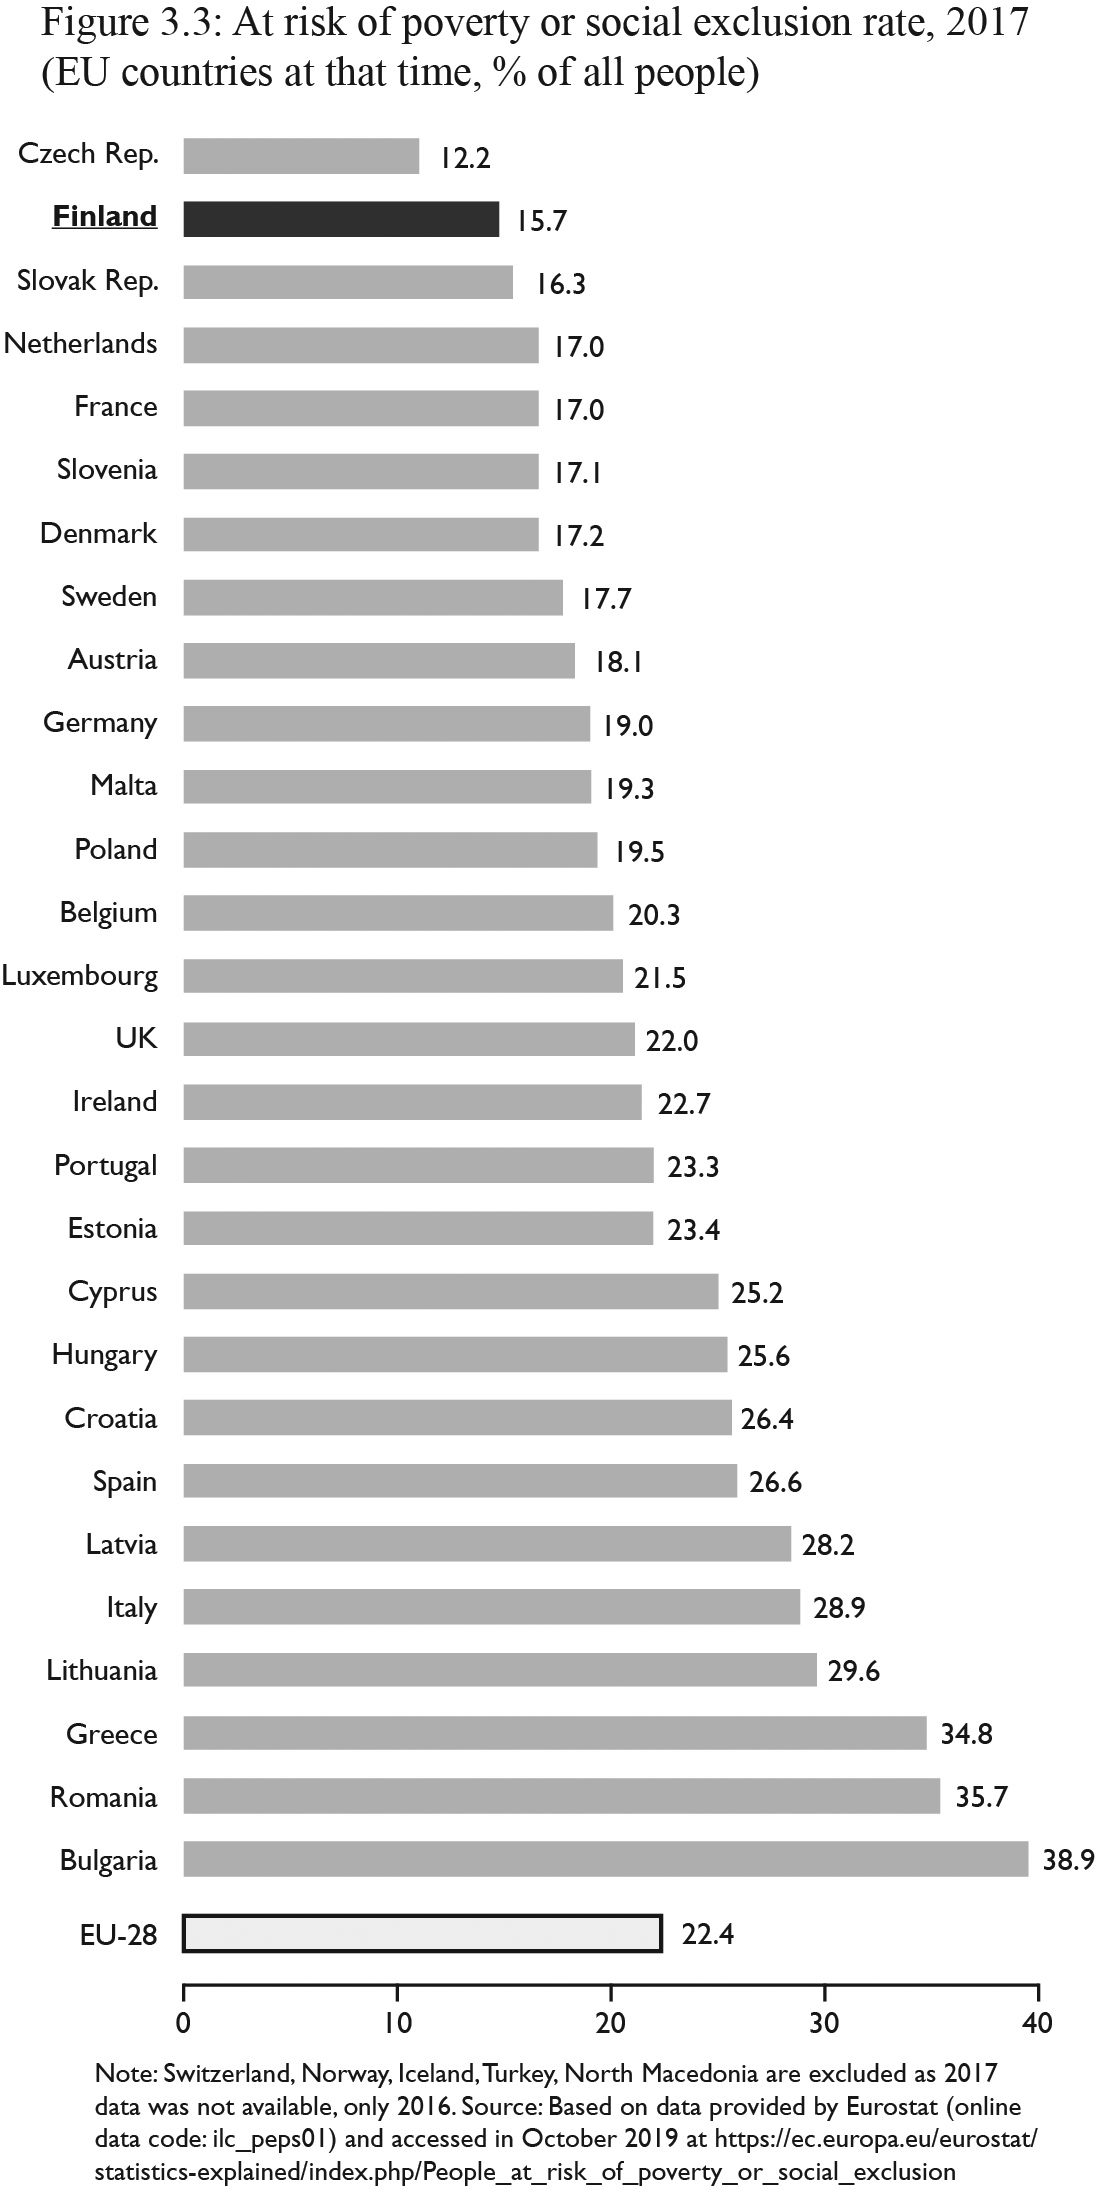 Figure 3.3: Note: Switzerland, Norway, Iceland, Turkey, North Macedonia are represented by 2016 data instead of 2017. Source: Based on data provided by Eurostat (2018d) (2018C0 (online data code: ilc_peps01) and accessed in October 2019 https://ec.europa.eu/eurostat/statistics-explained/index.php/People_at_risk_of_poverty_or_social_exclusion